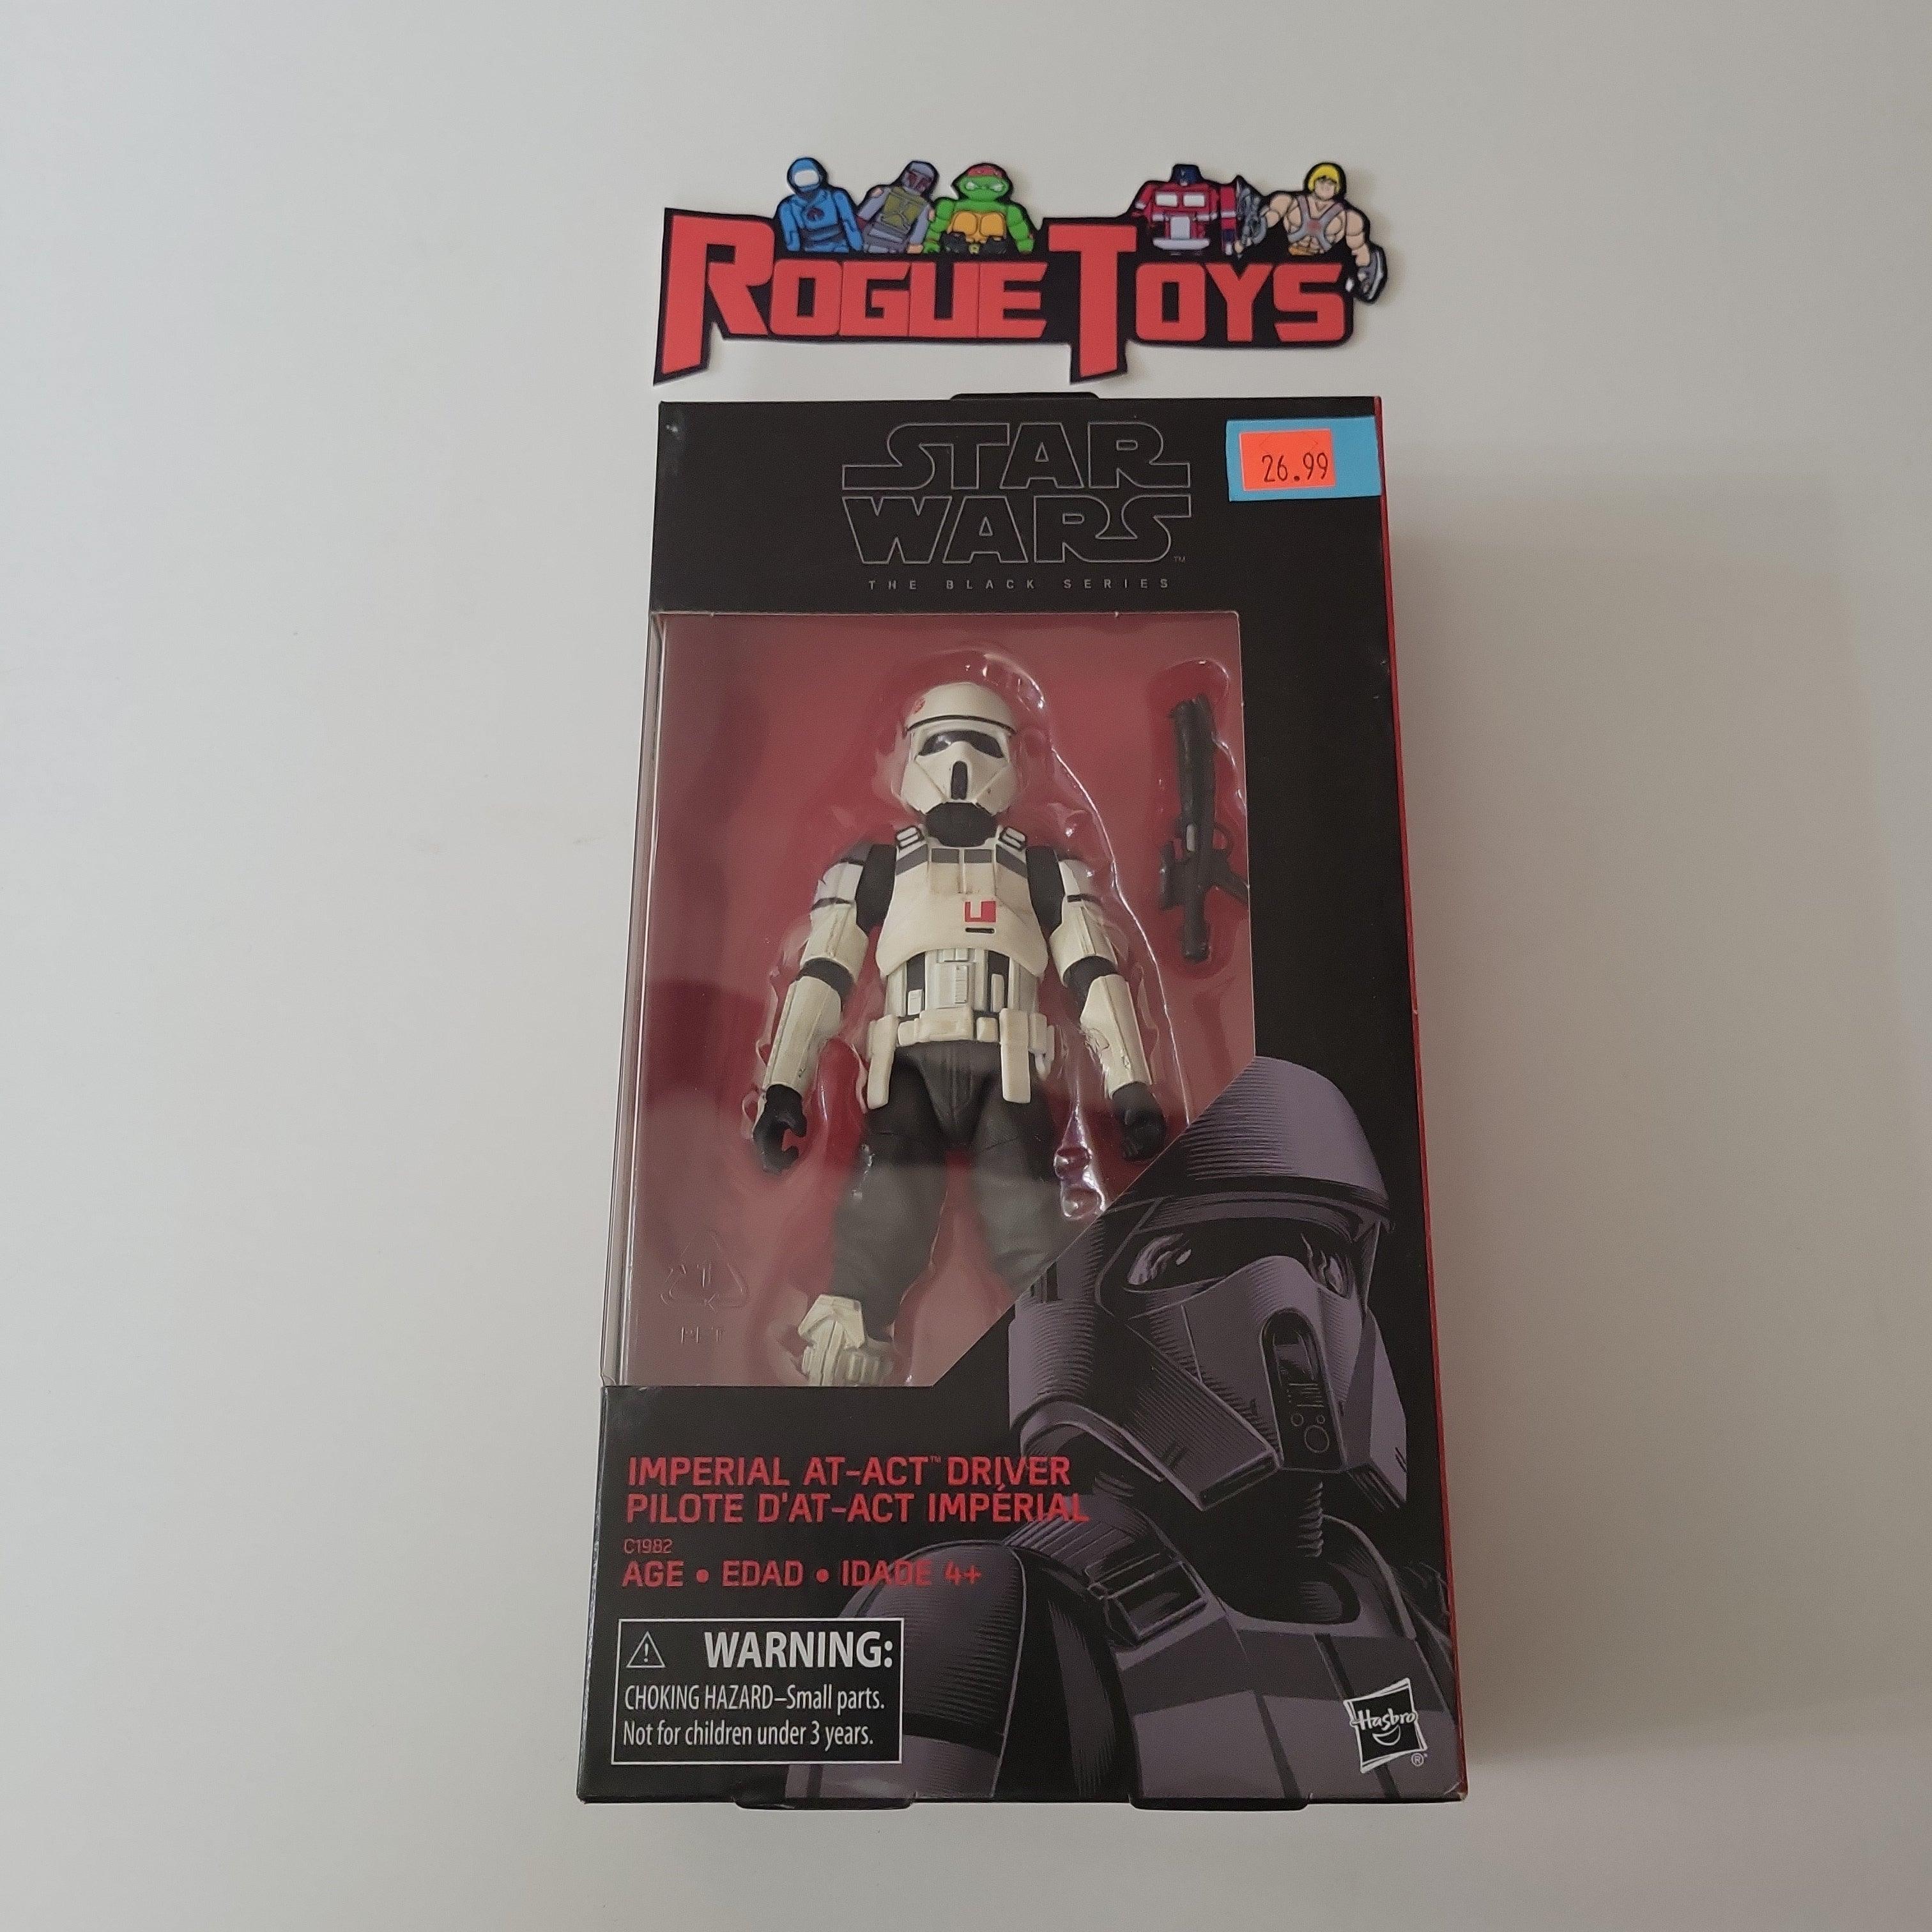 HASBRO Star Wars the Black Series, Imperial AT-ACT Driver - Rogue Toys